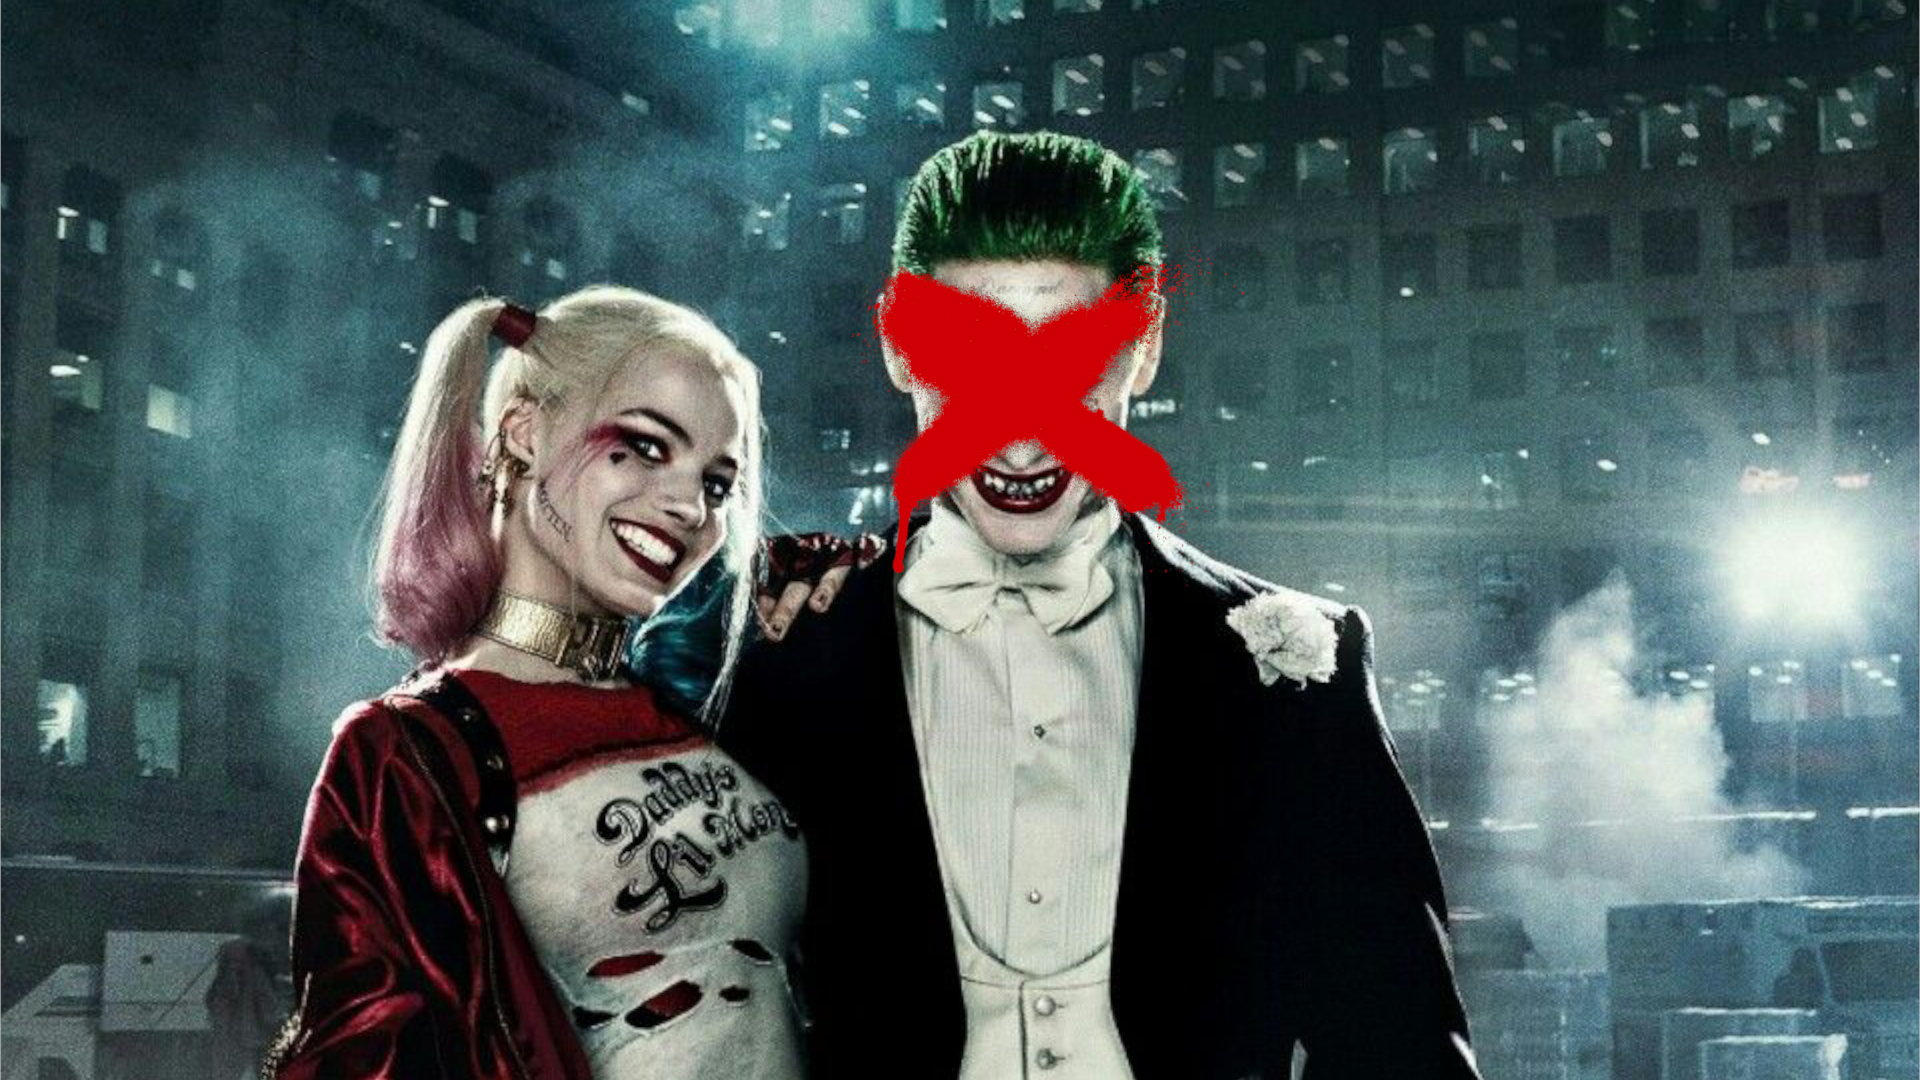 Leaked Birds Of Prey Photo Suggests Harley Quinn And The Joker Have Split